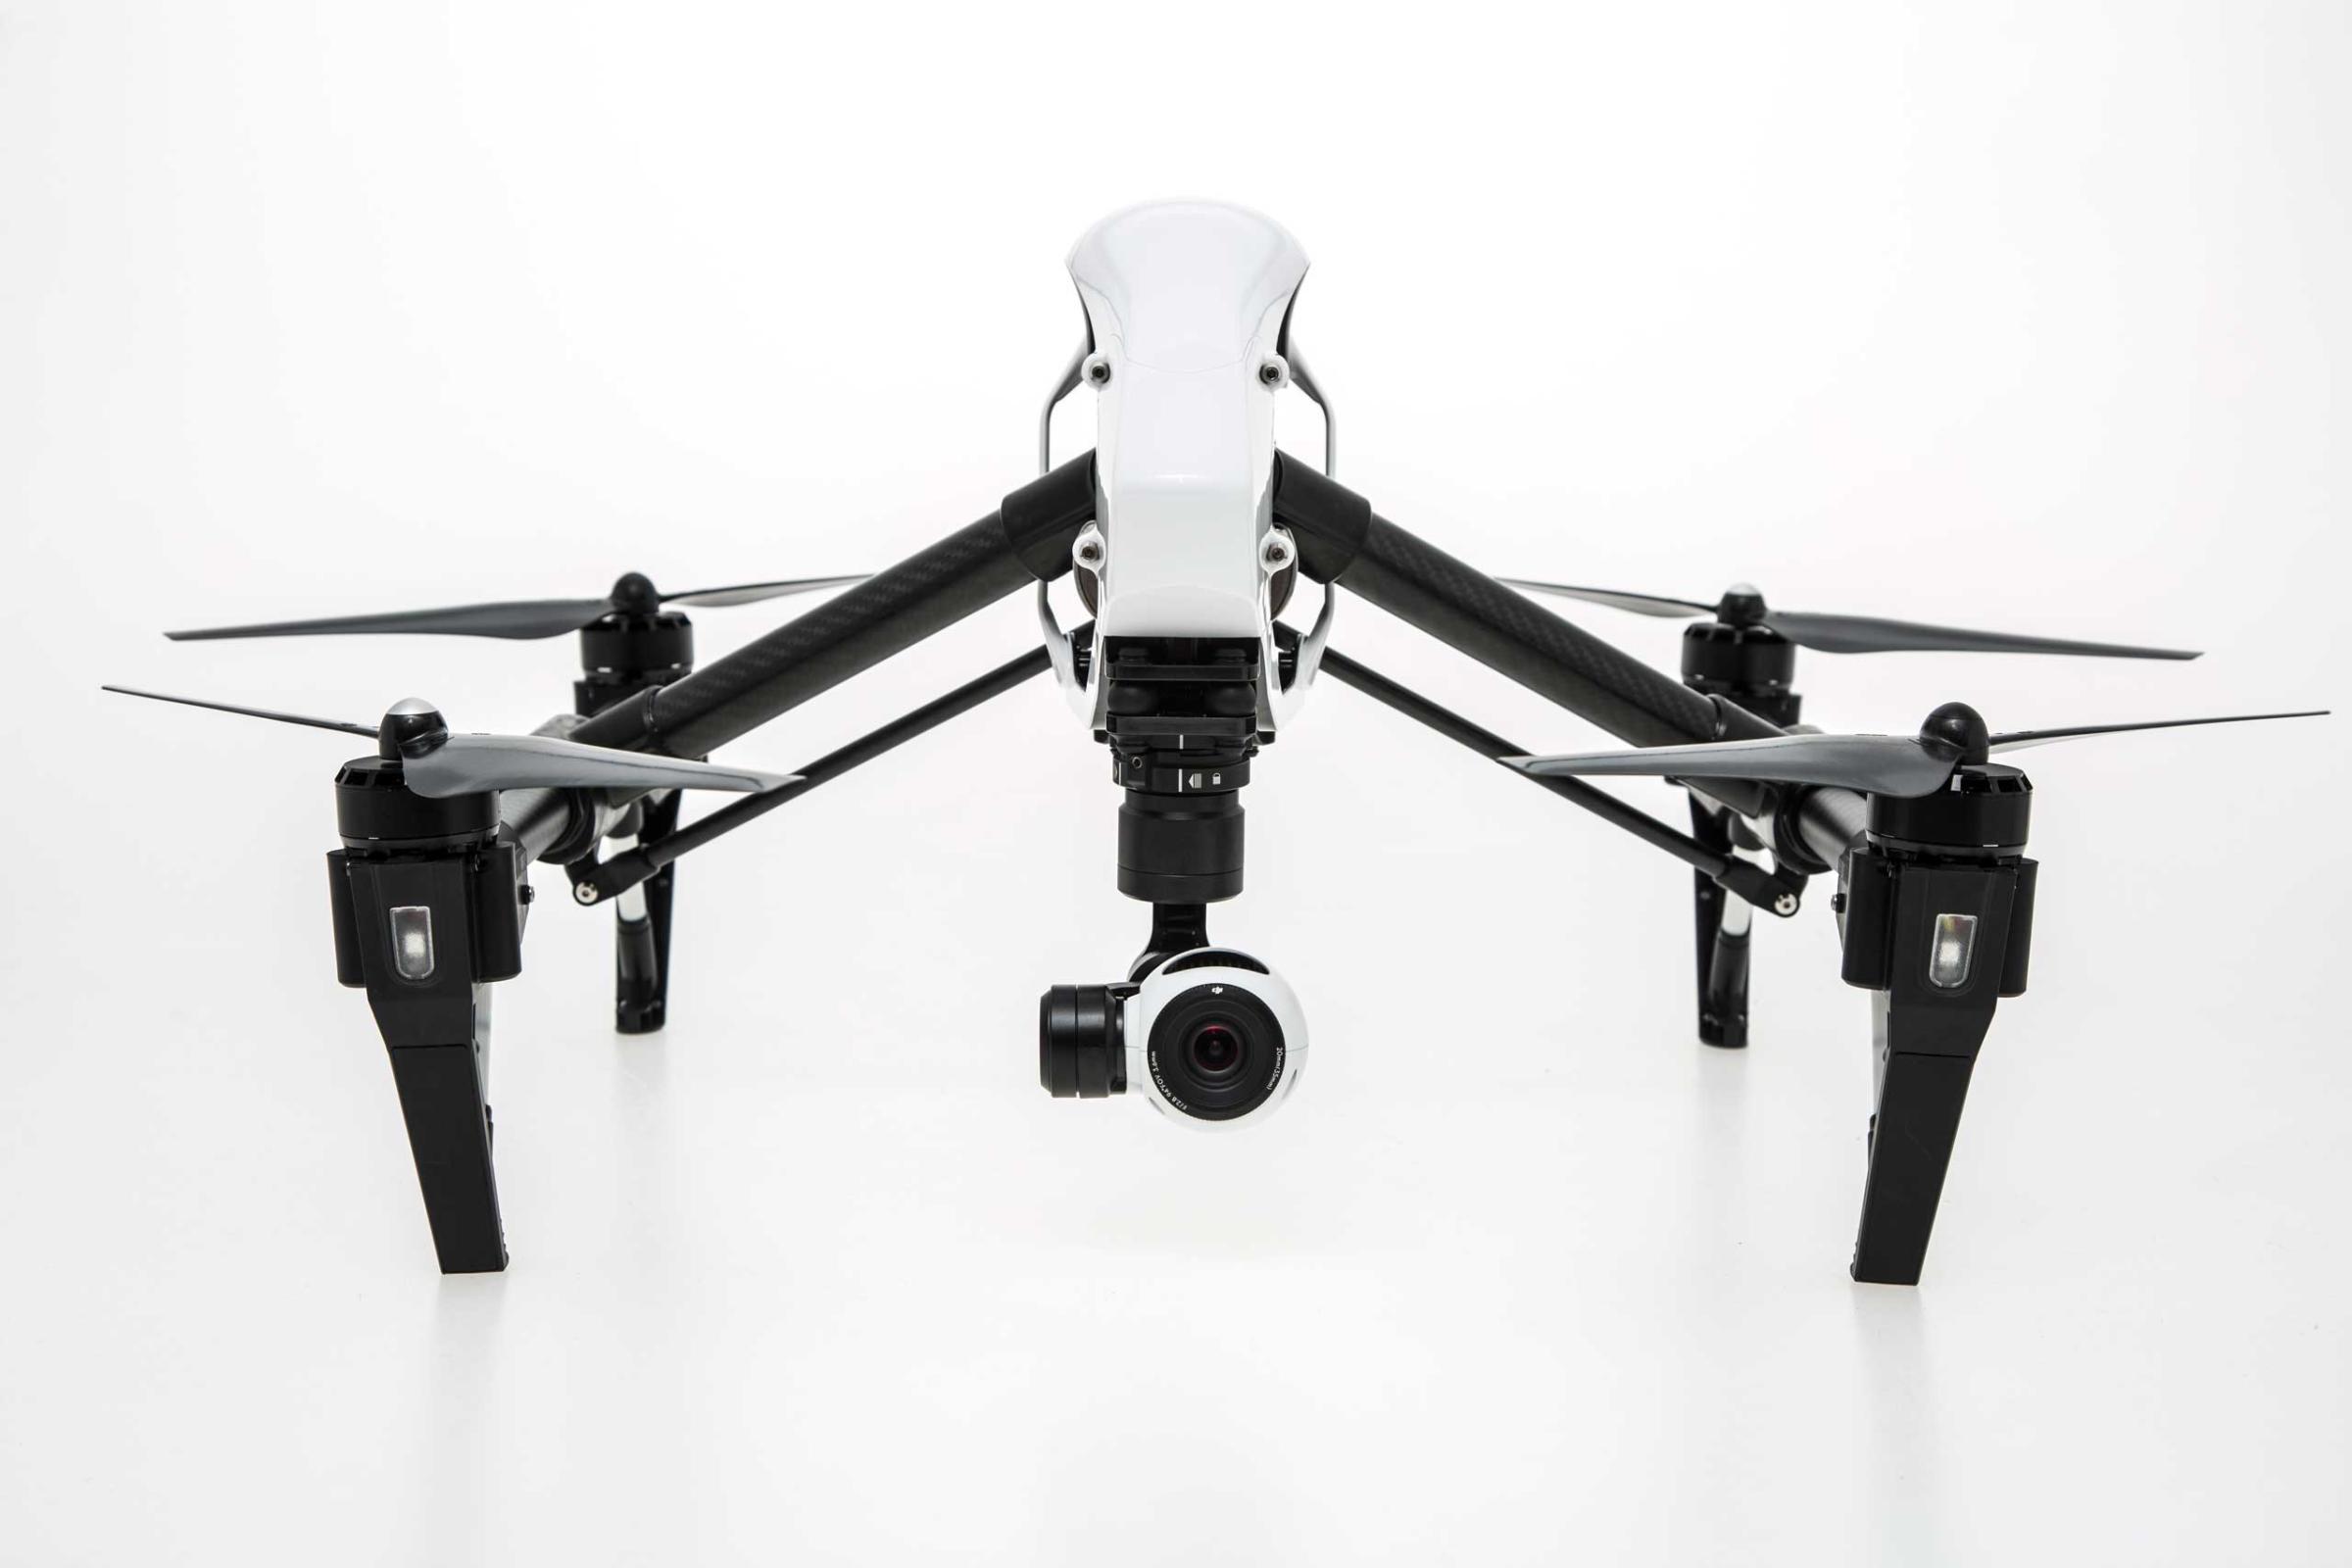 DJI Inspire 1 The latest DJI quadcopter retains the simple style that's made their drones so popular, but adds 4K video capability — and the ability to transmit the HD video wirelessly to an on-the-ground devices. A new ground-facing camera also allows Inspire 1 to fly steadily to keep the video footage clean.